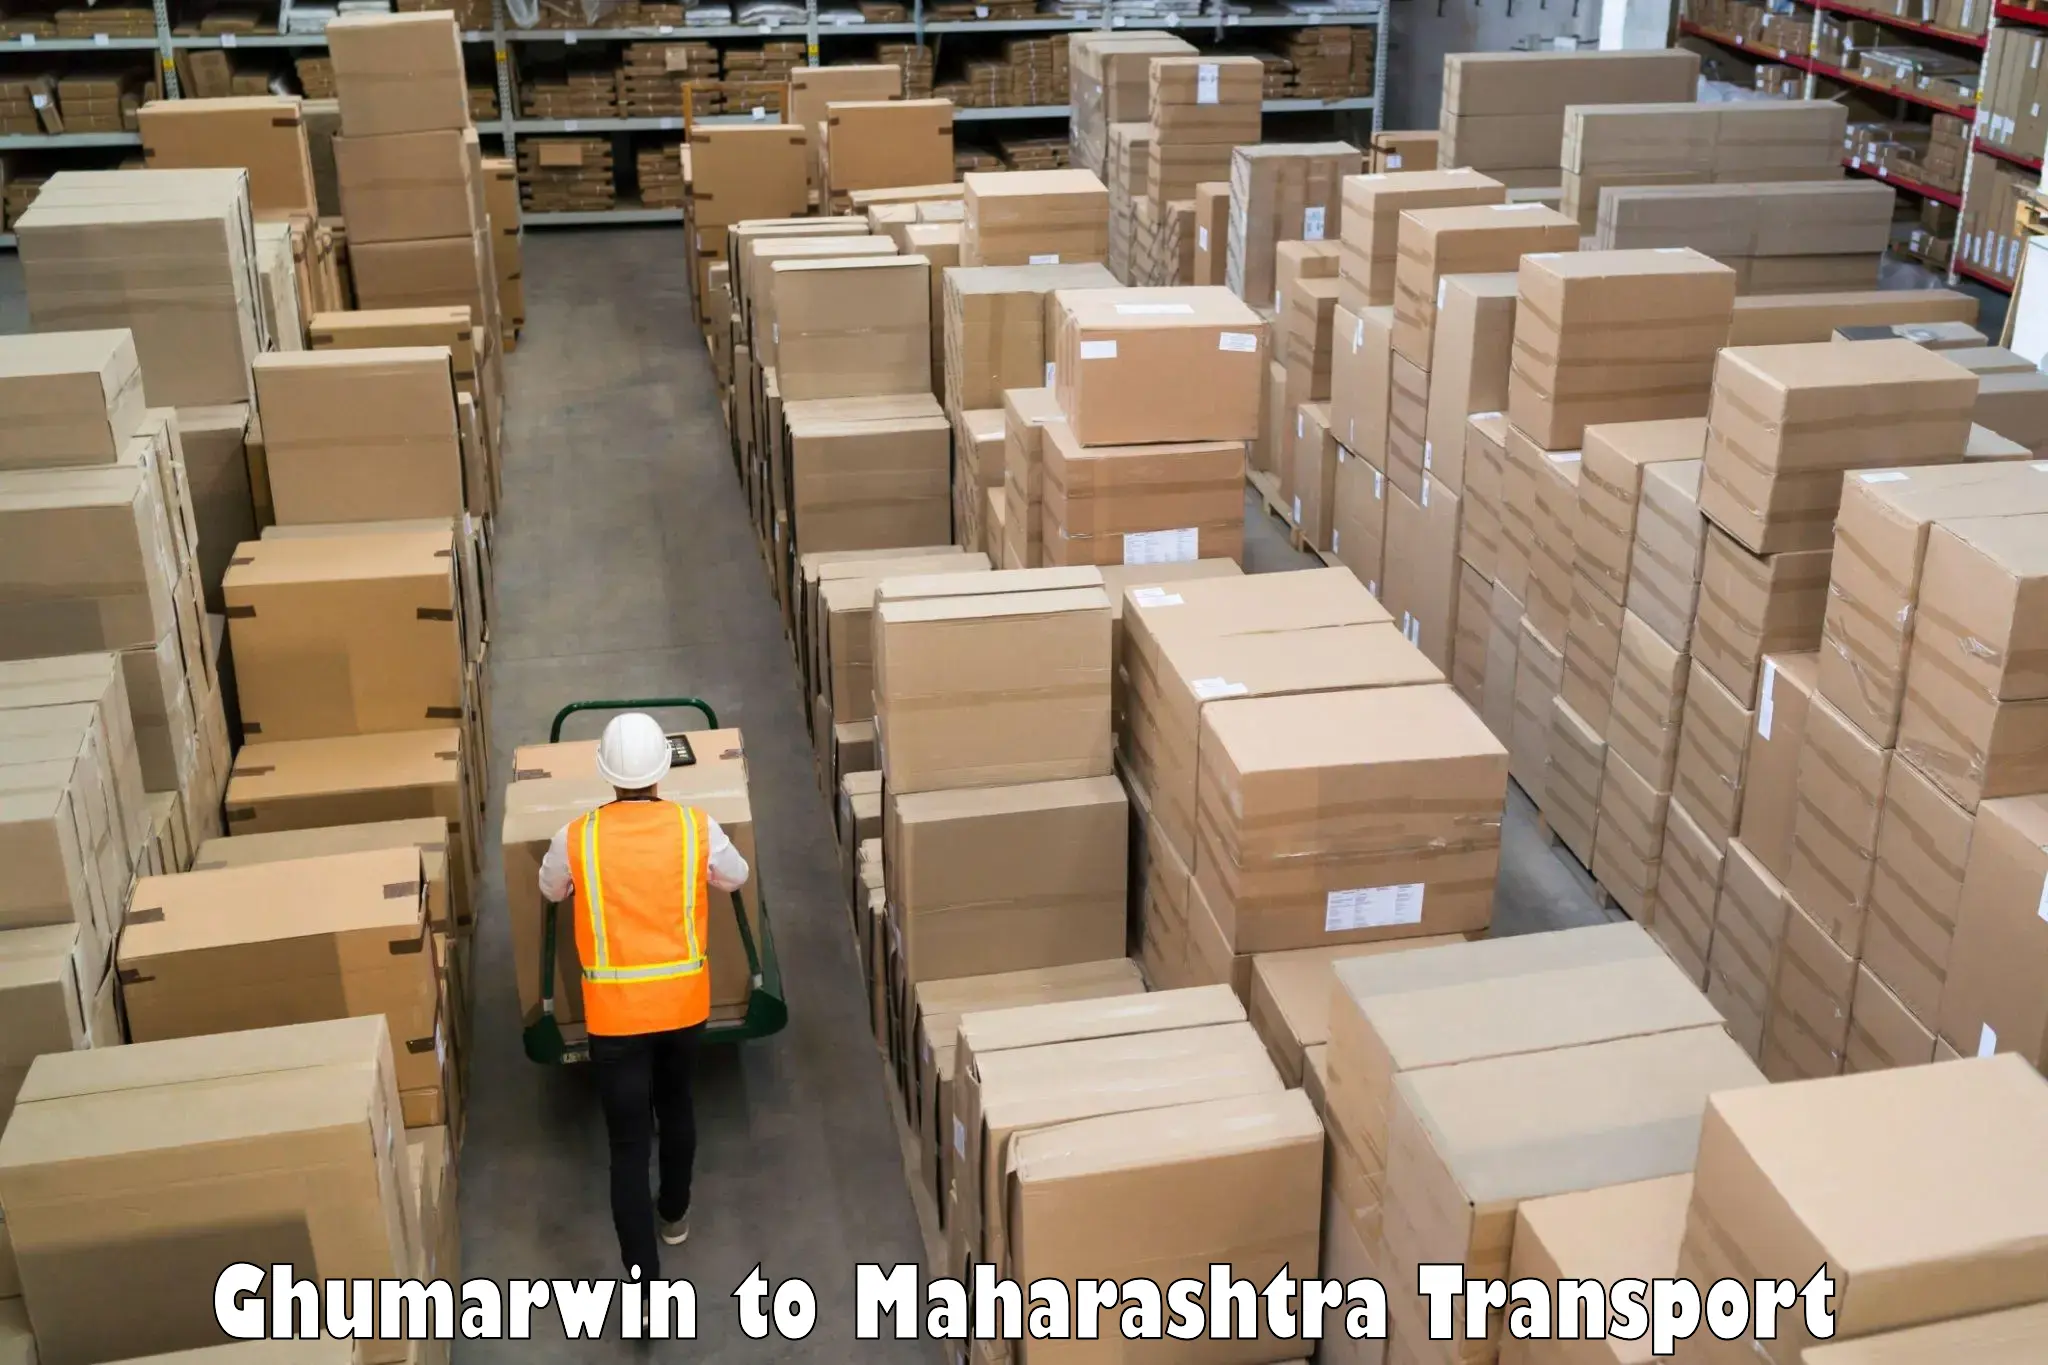 Air freight transport services Ghumarwin to Pune